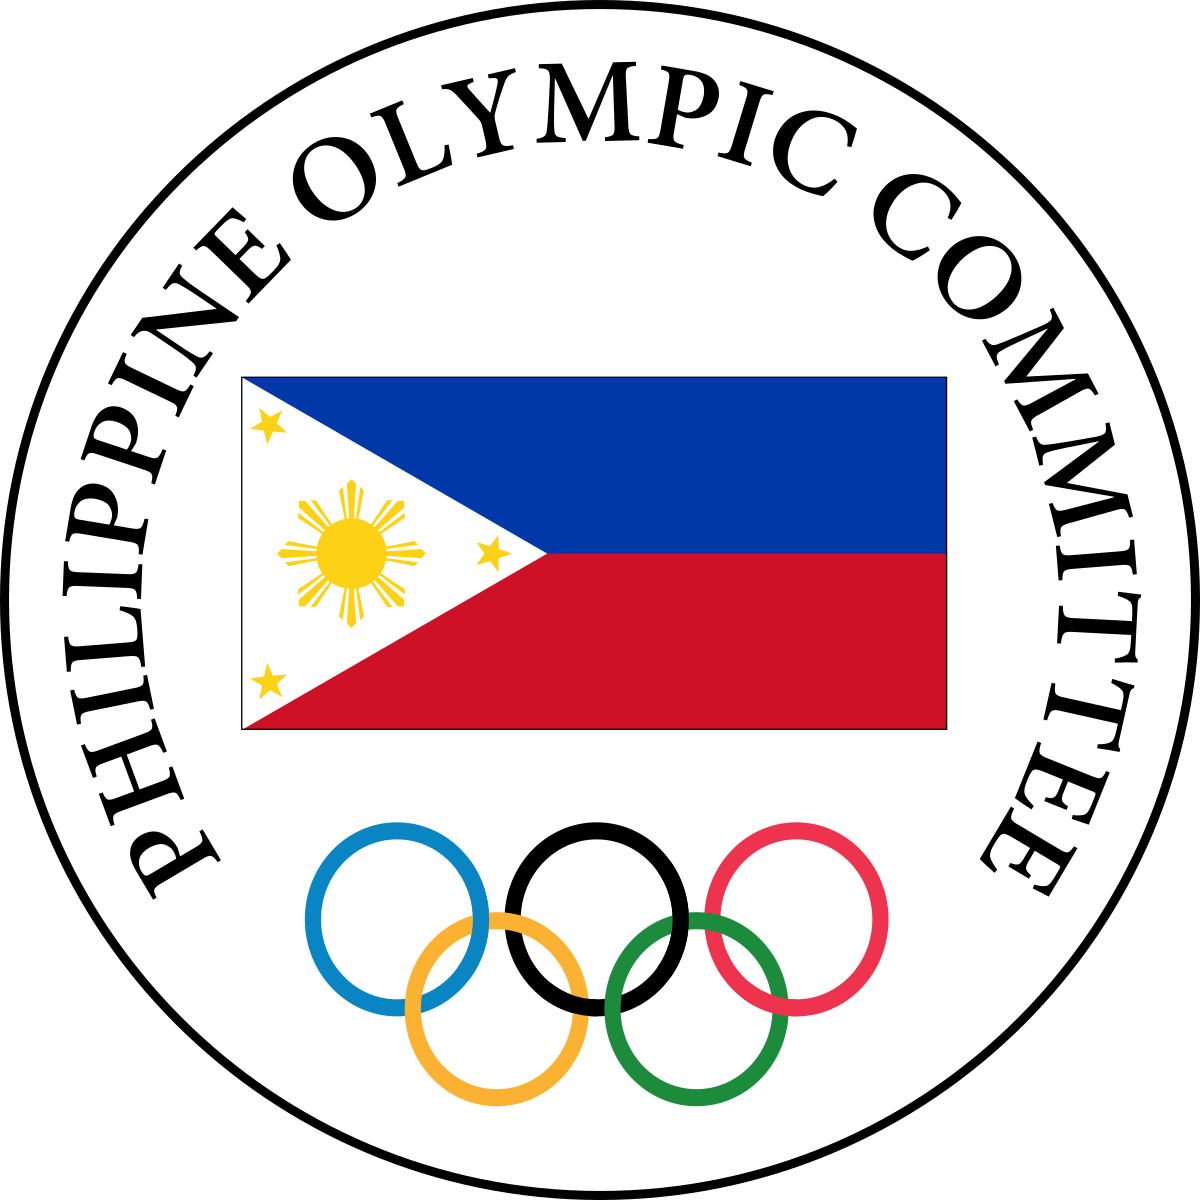 Philip Ella Juico and Abraham Tolentino will go head-to-head to replace Ricky Vargas as President of the Philippine Olympic Committee ©POC